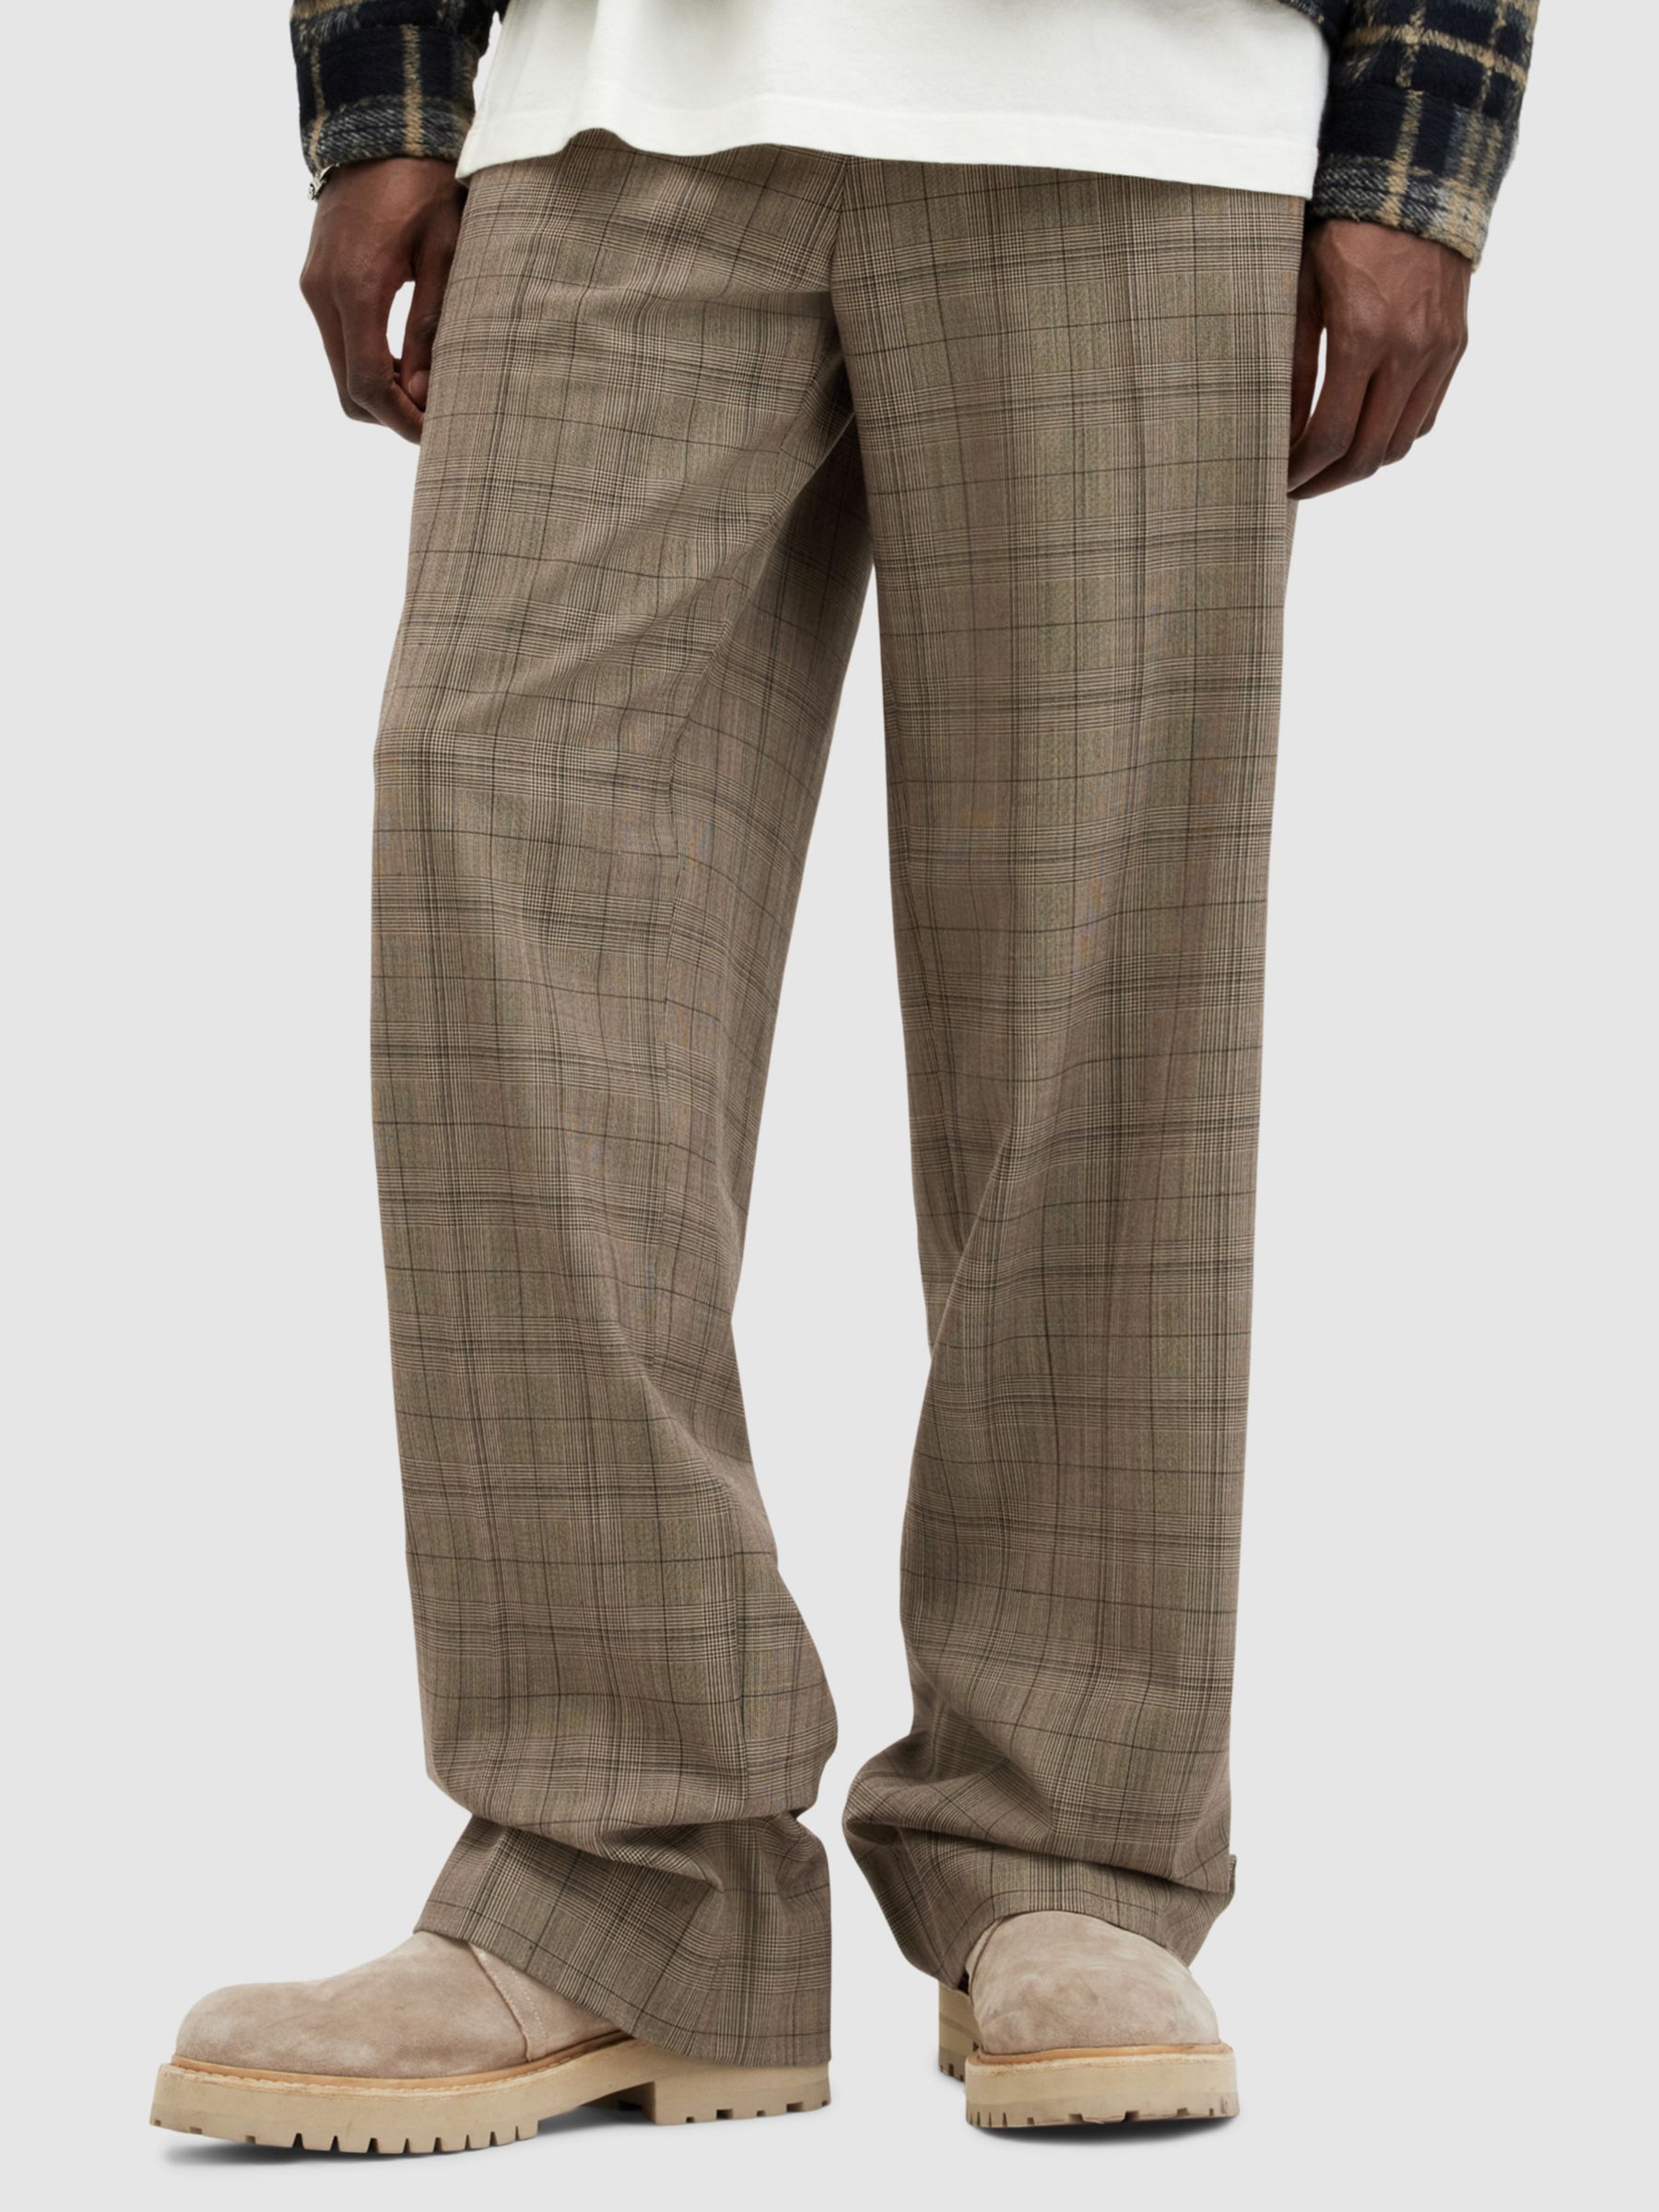 Buy AllSaints Hobart Trousers, Stone Online at johnlewis.com